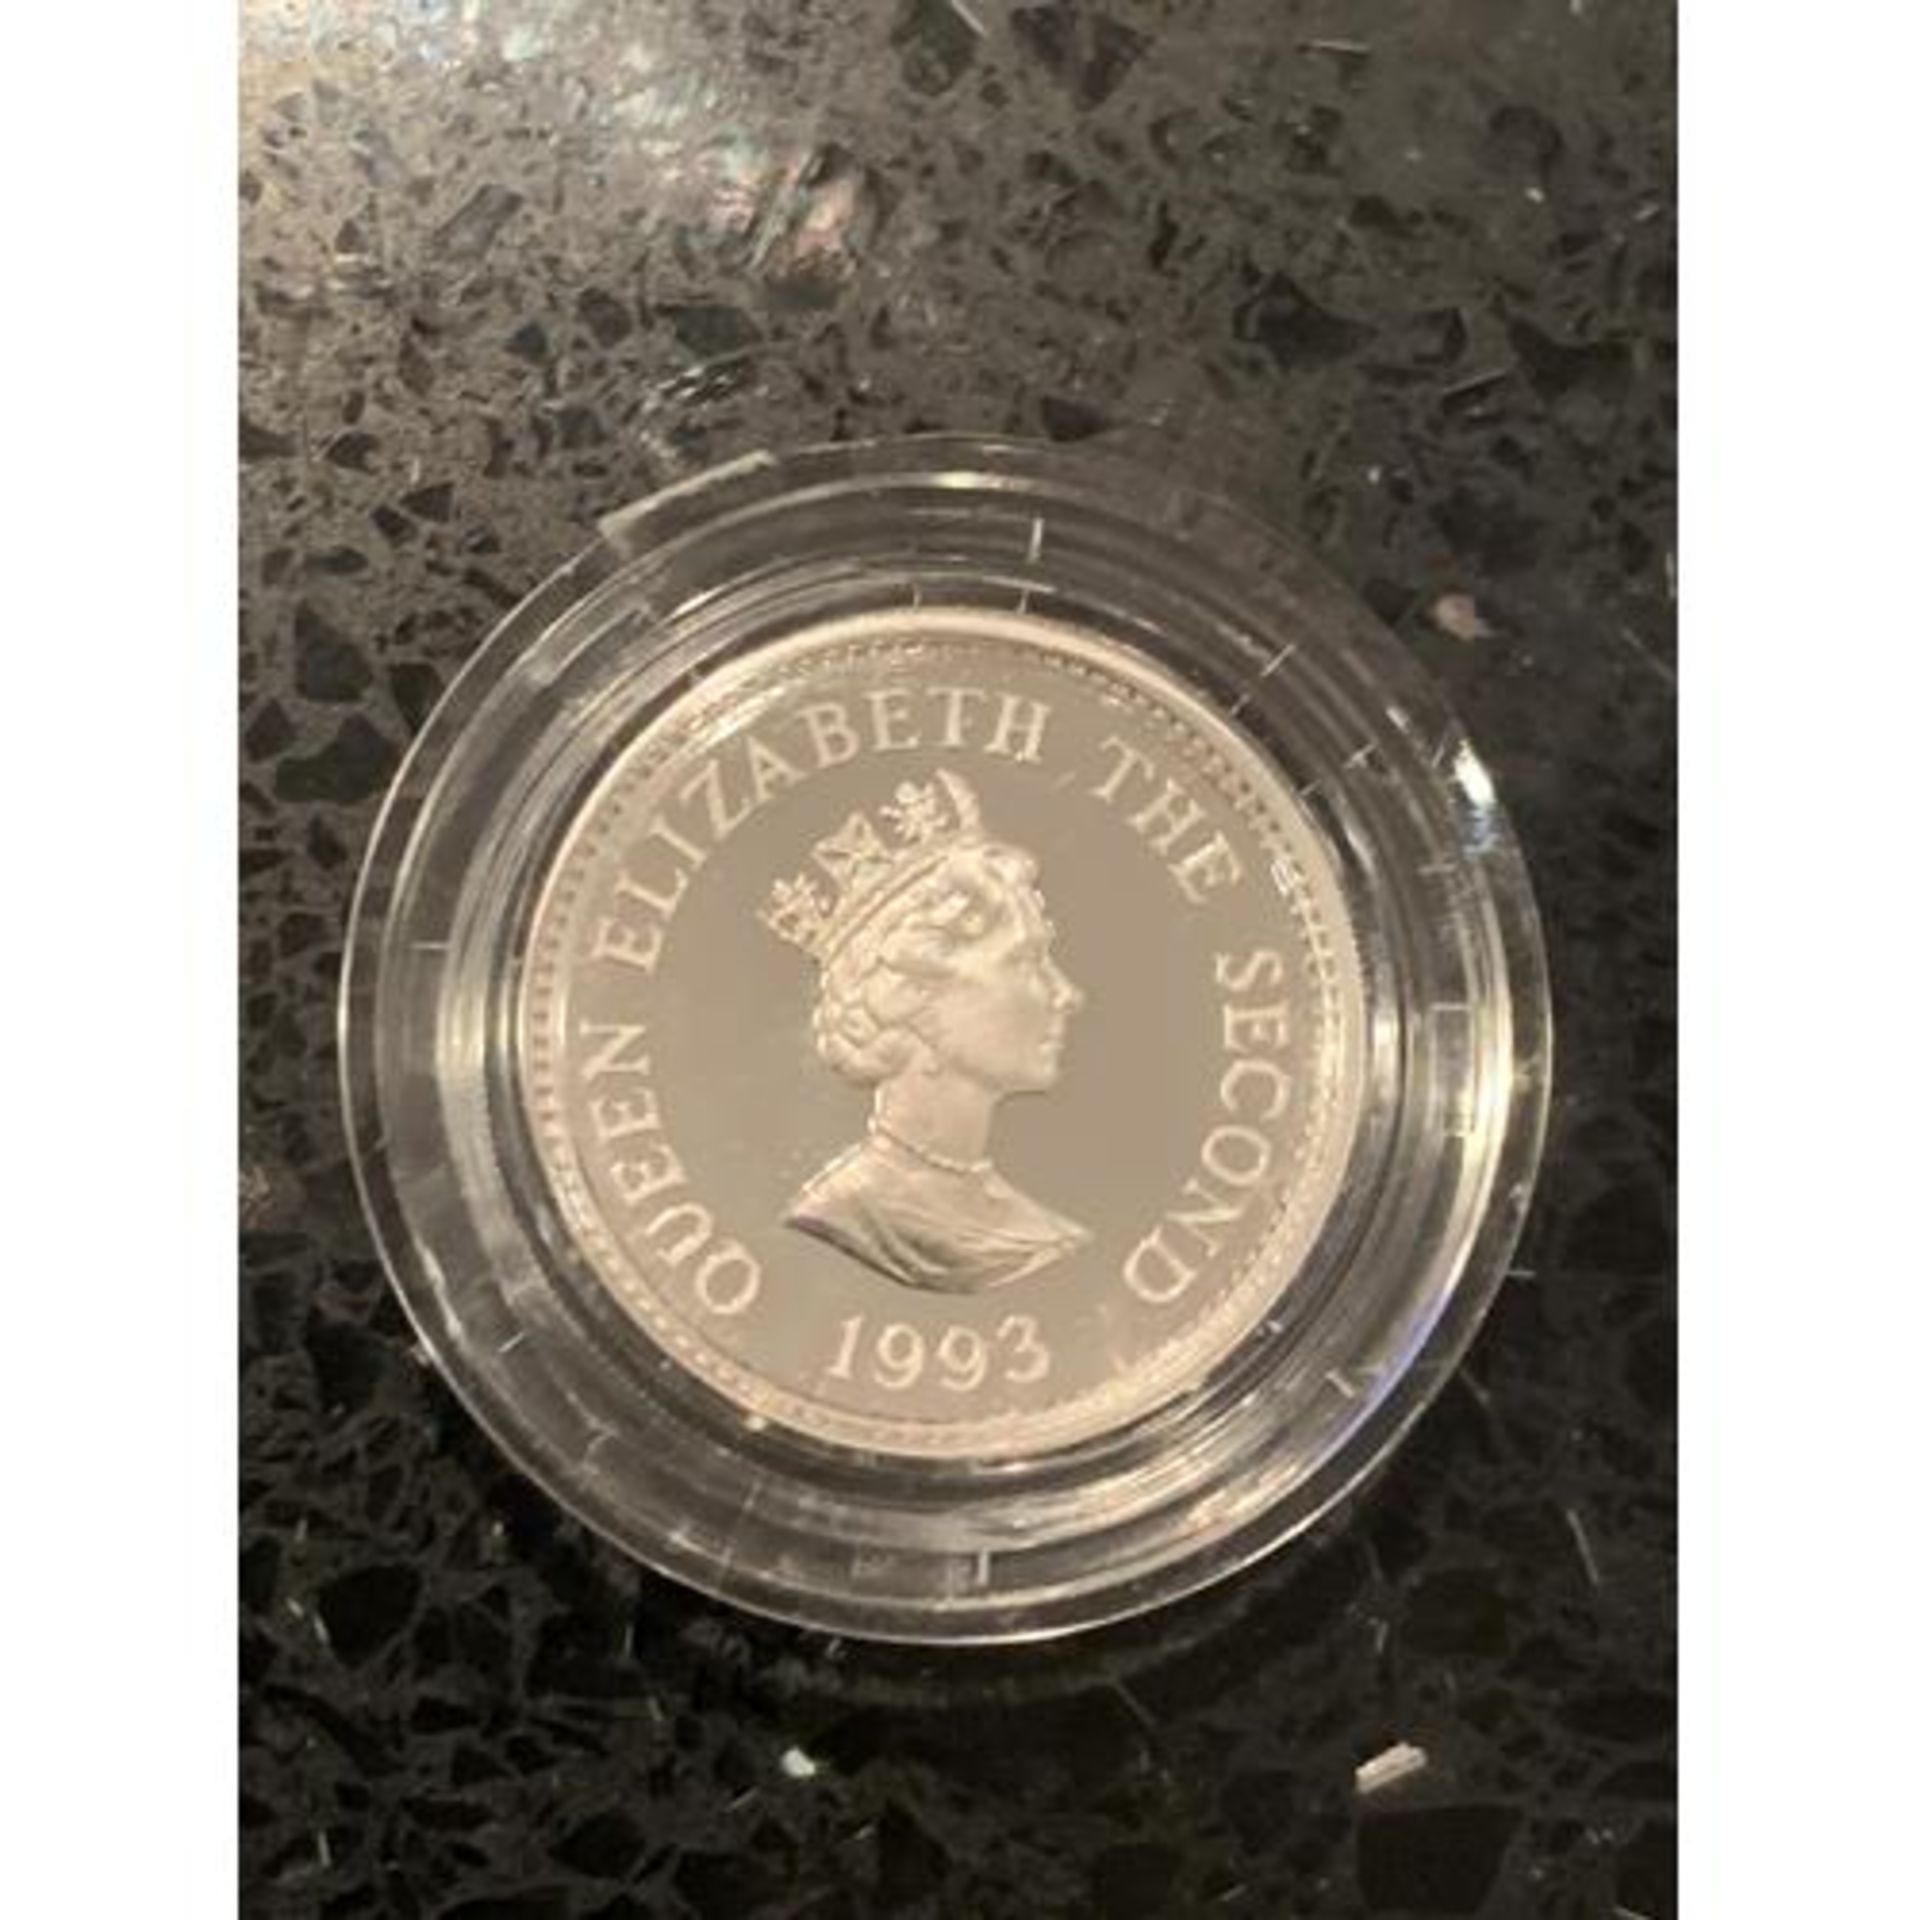 ALDERNEY 1993 £1 POUND SILVER PROOF COIN – QUEEN’S 40TH ANNIVERSARY OF CORONATION . - Image 2 of 2